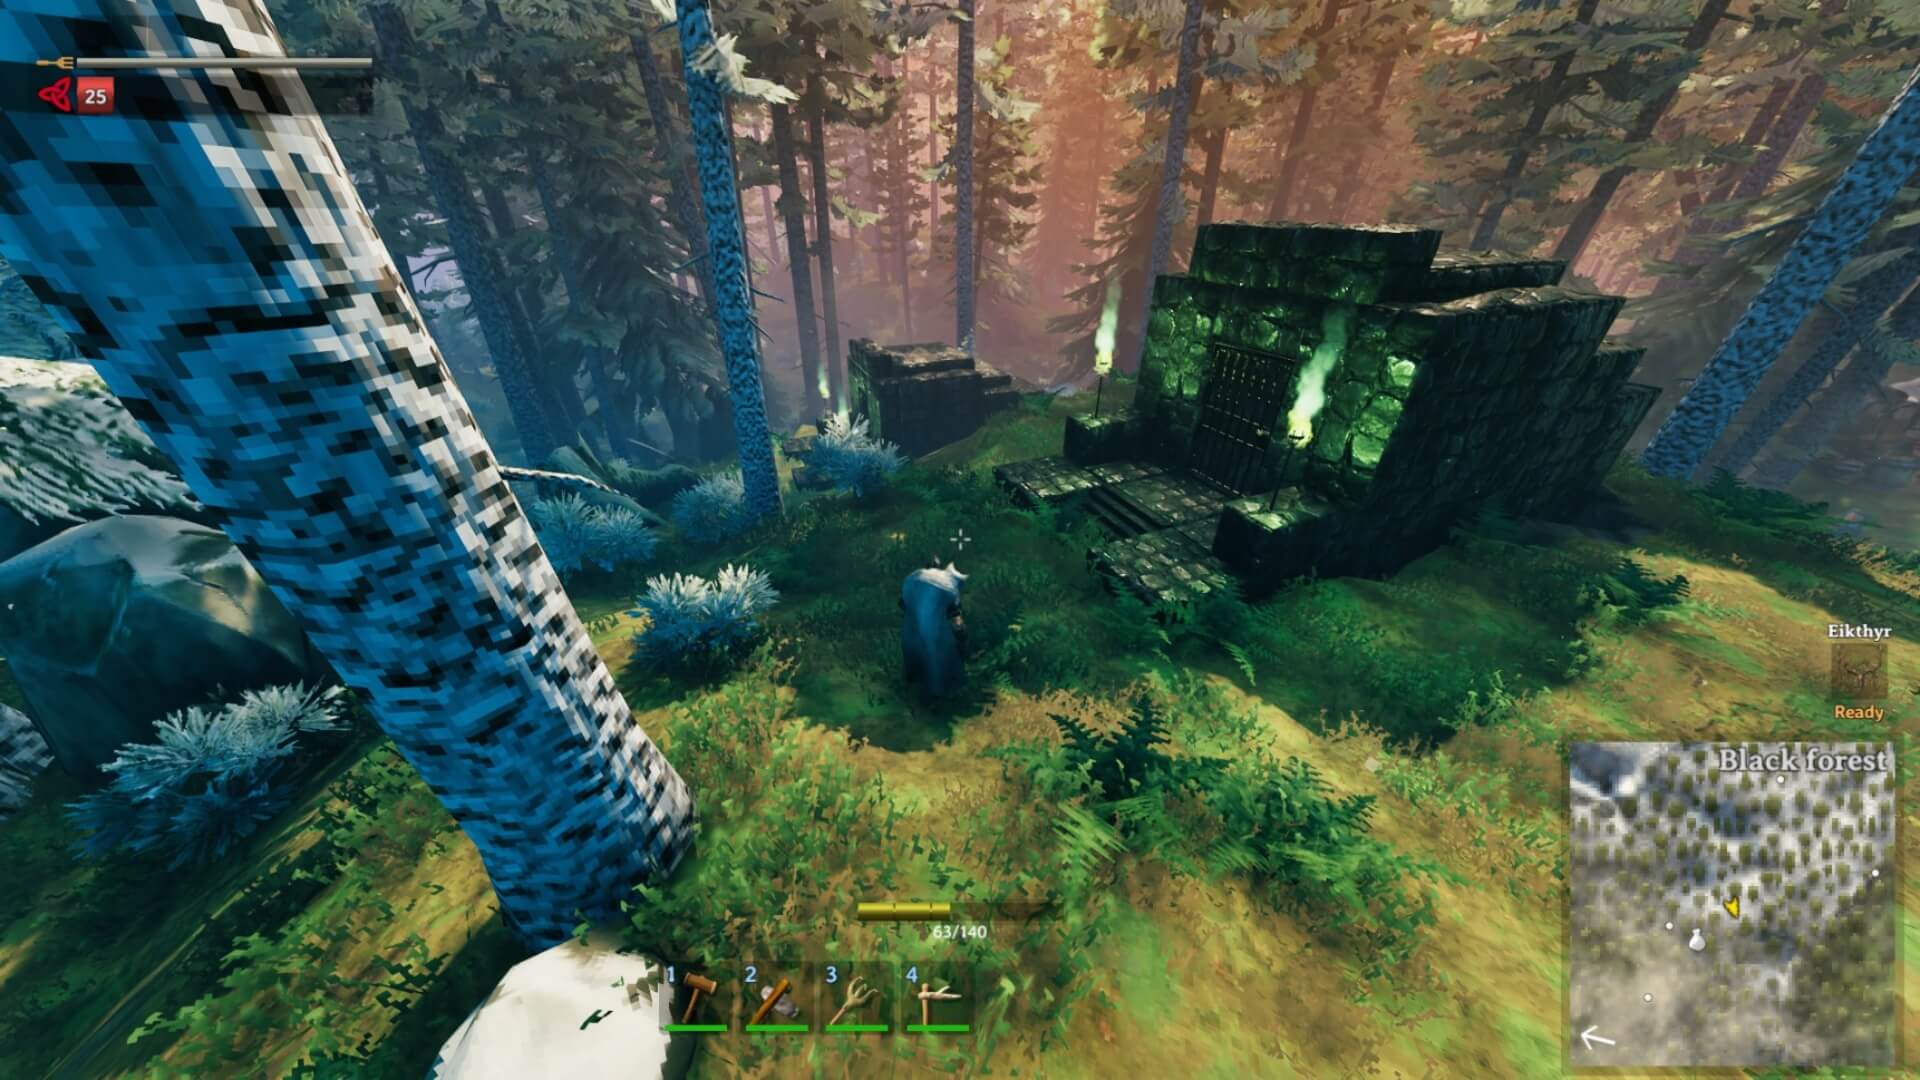 A sunken crypt in the Black Forest as recreated in Valheim.